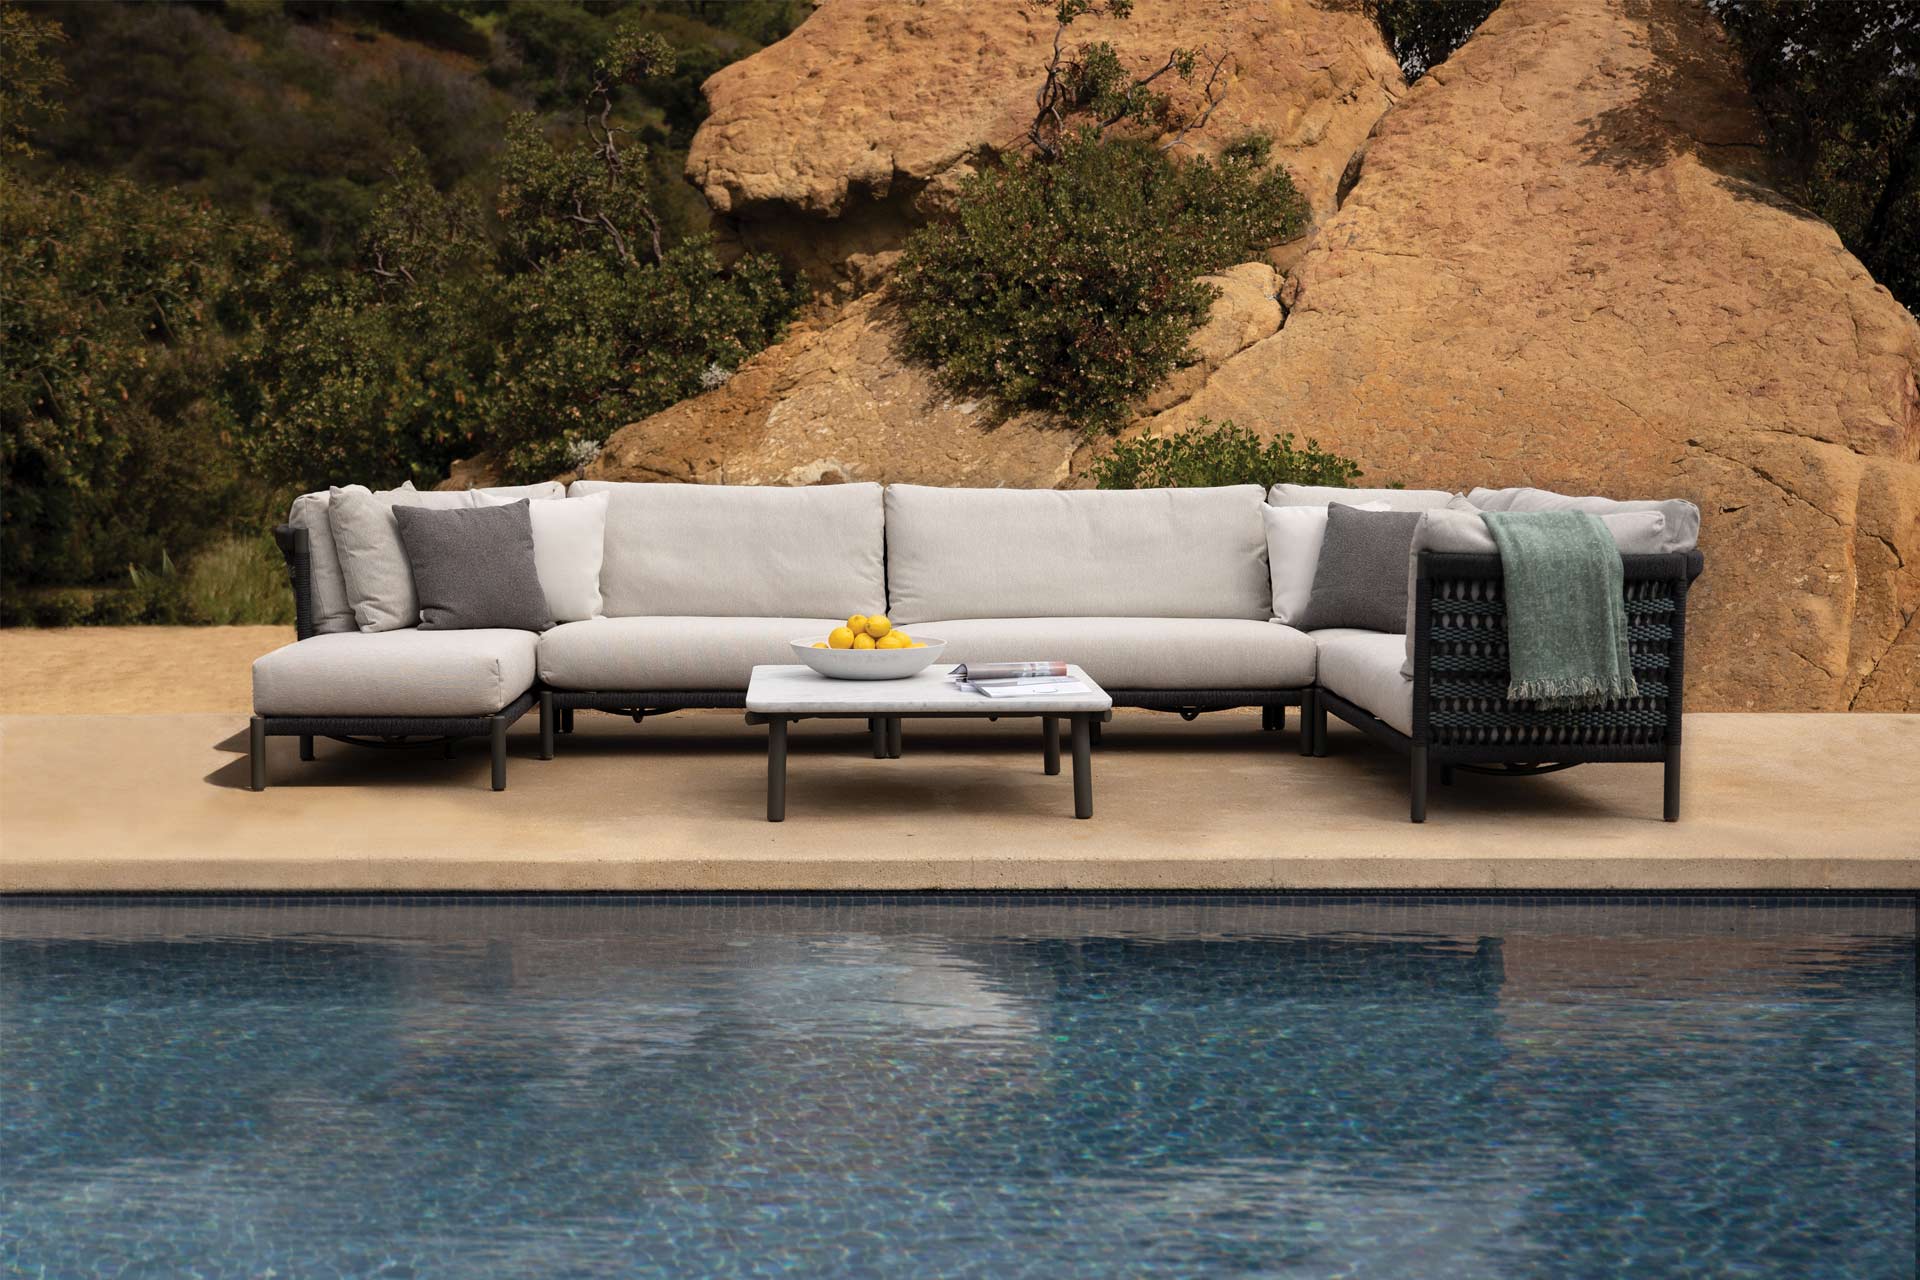 Janus et Cie introduces new outdoor furniture collections - Sleeper